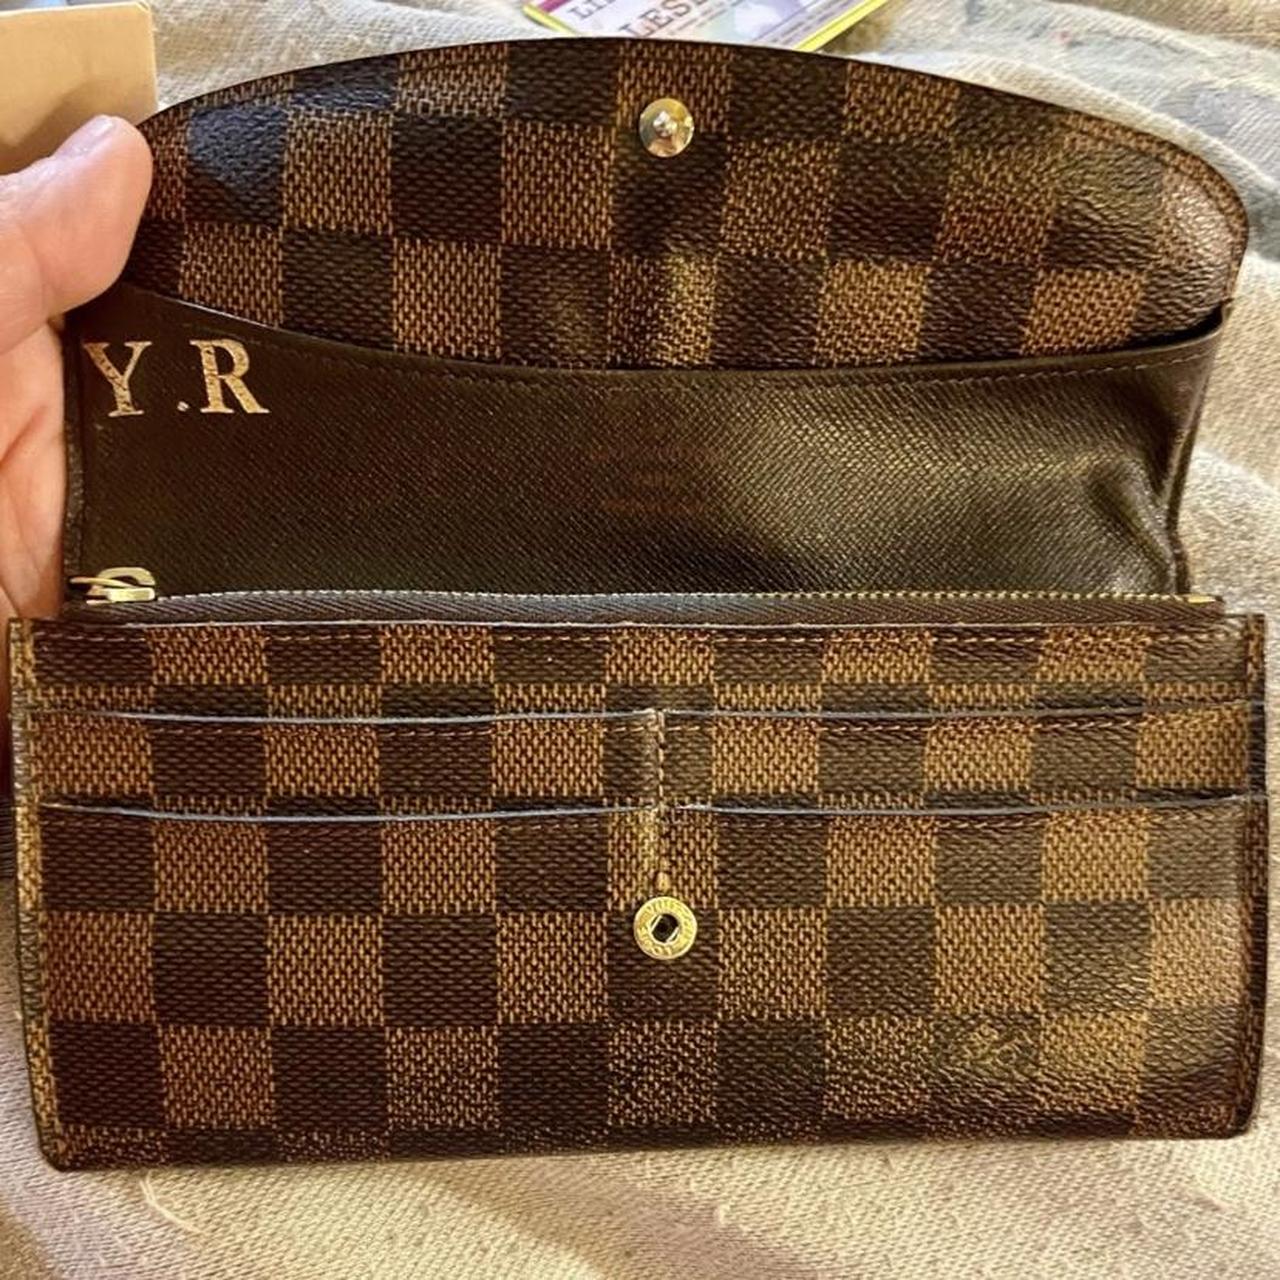 Great used condition vintage, authentic LV Sarah  - Depop